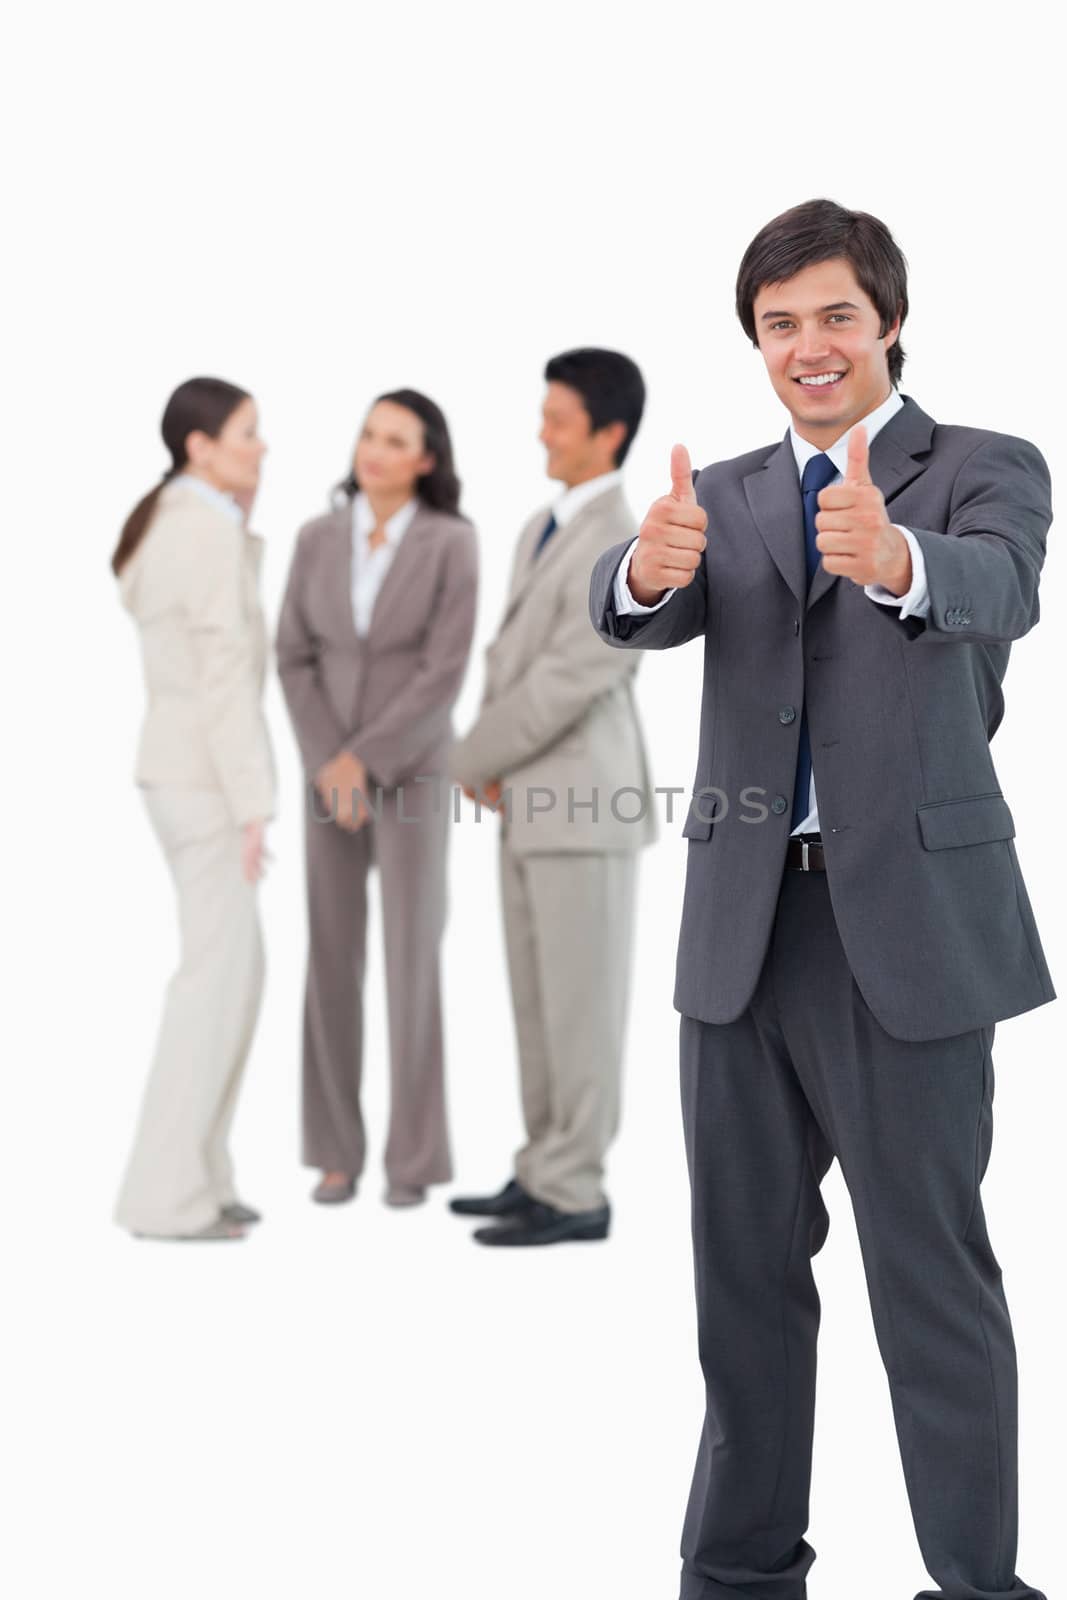 Salesman giving thumbs up with colleagues behind him by Wavebreakmedia